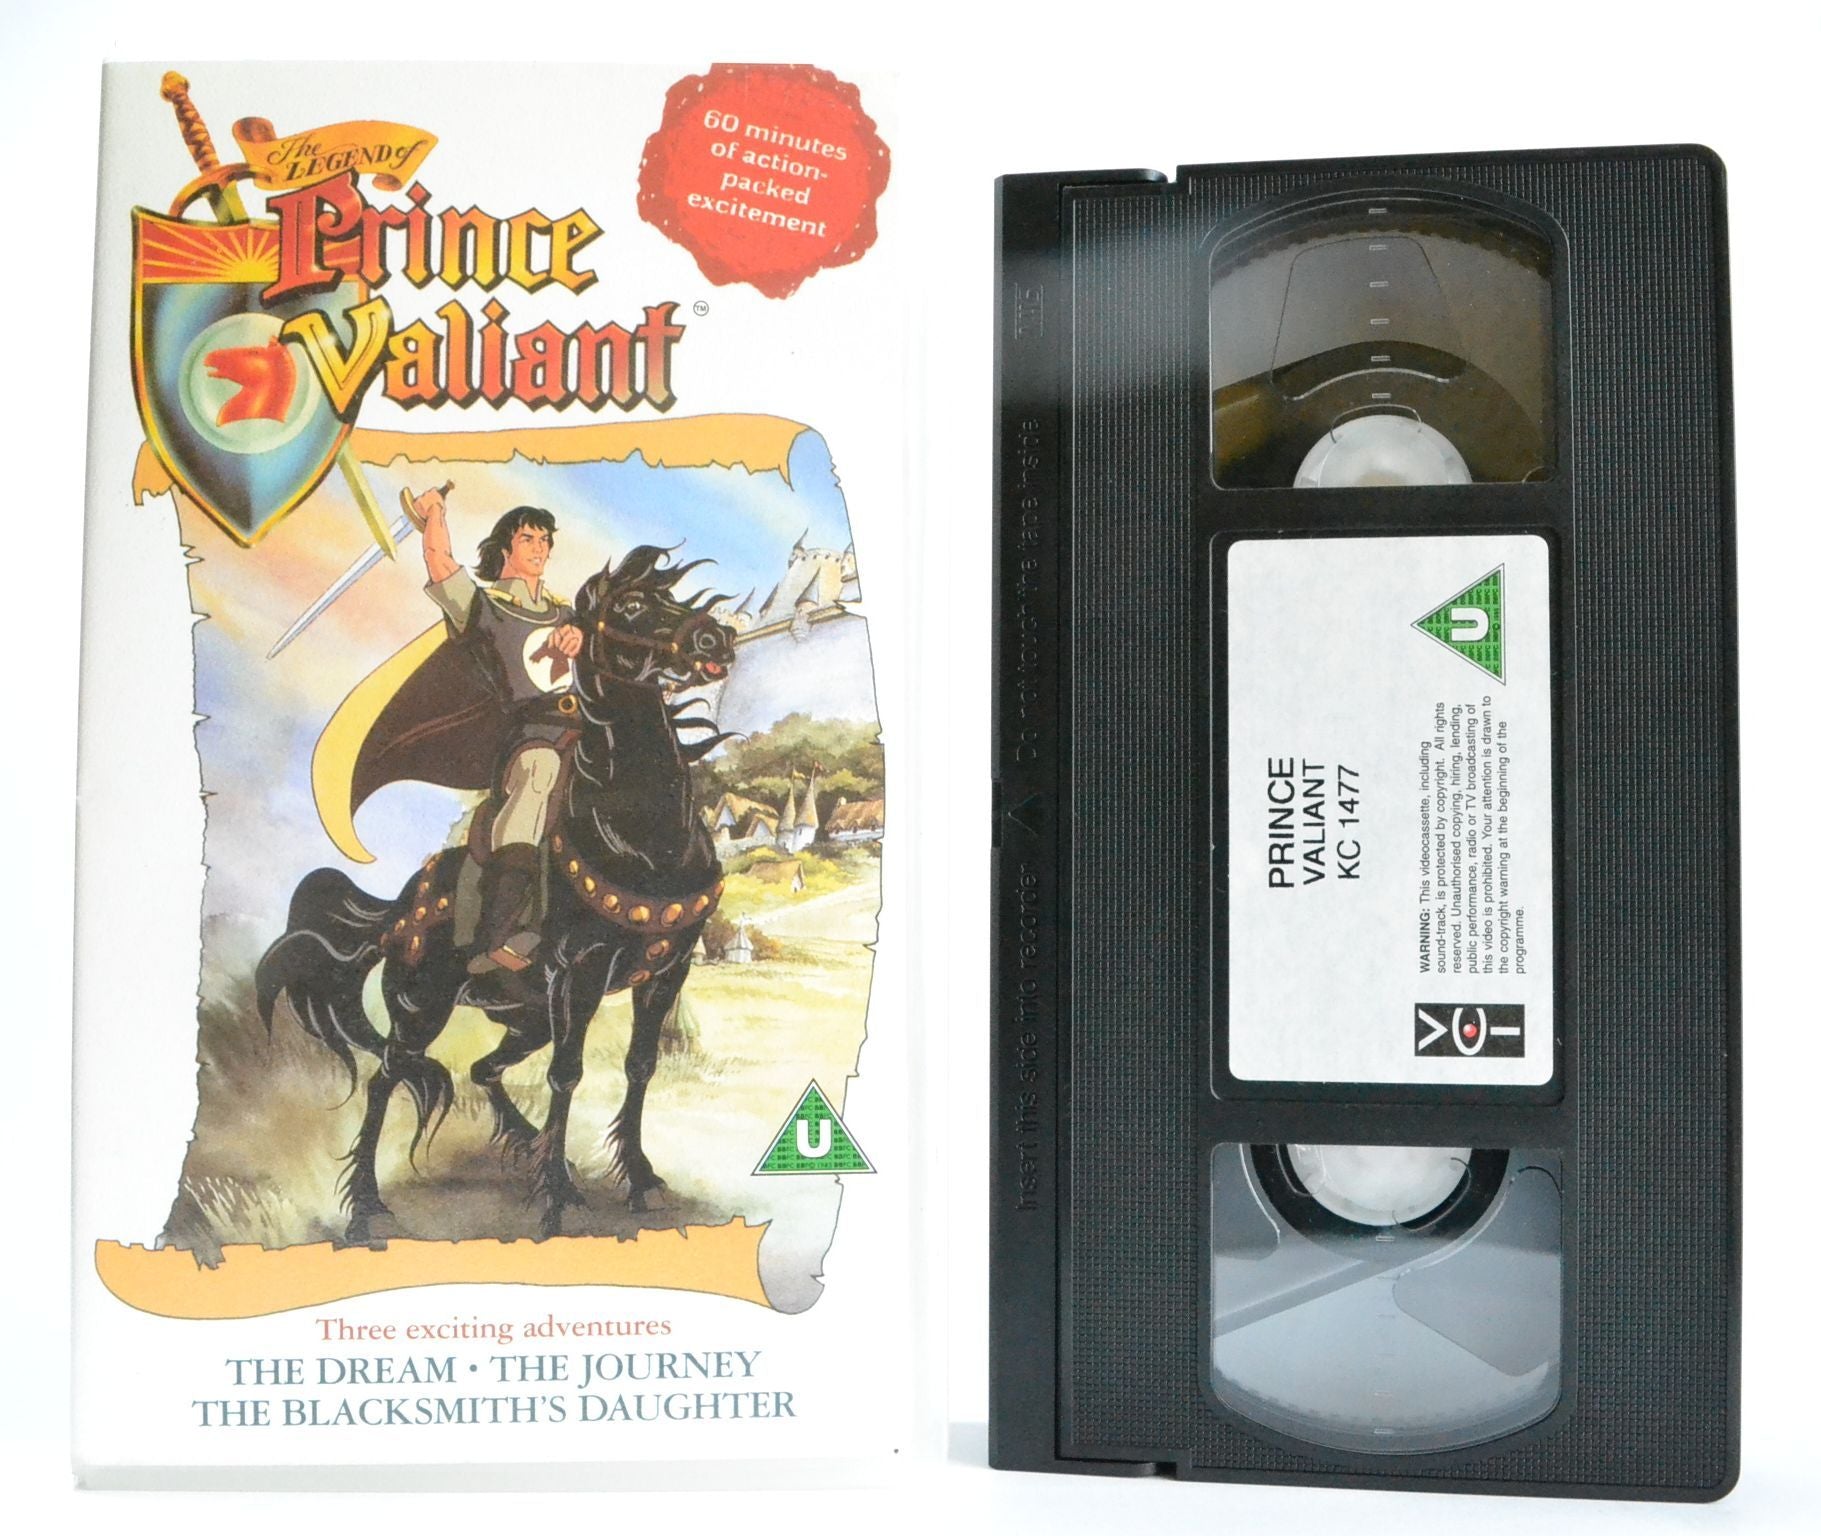 The Legend Of Prince Valiant: 60 Minutes [Serious Action] The Dream / Journey VHS-